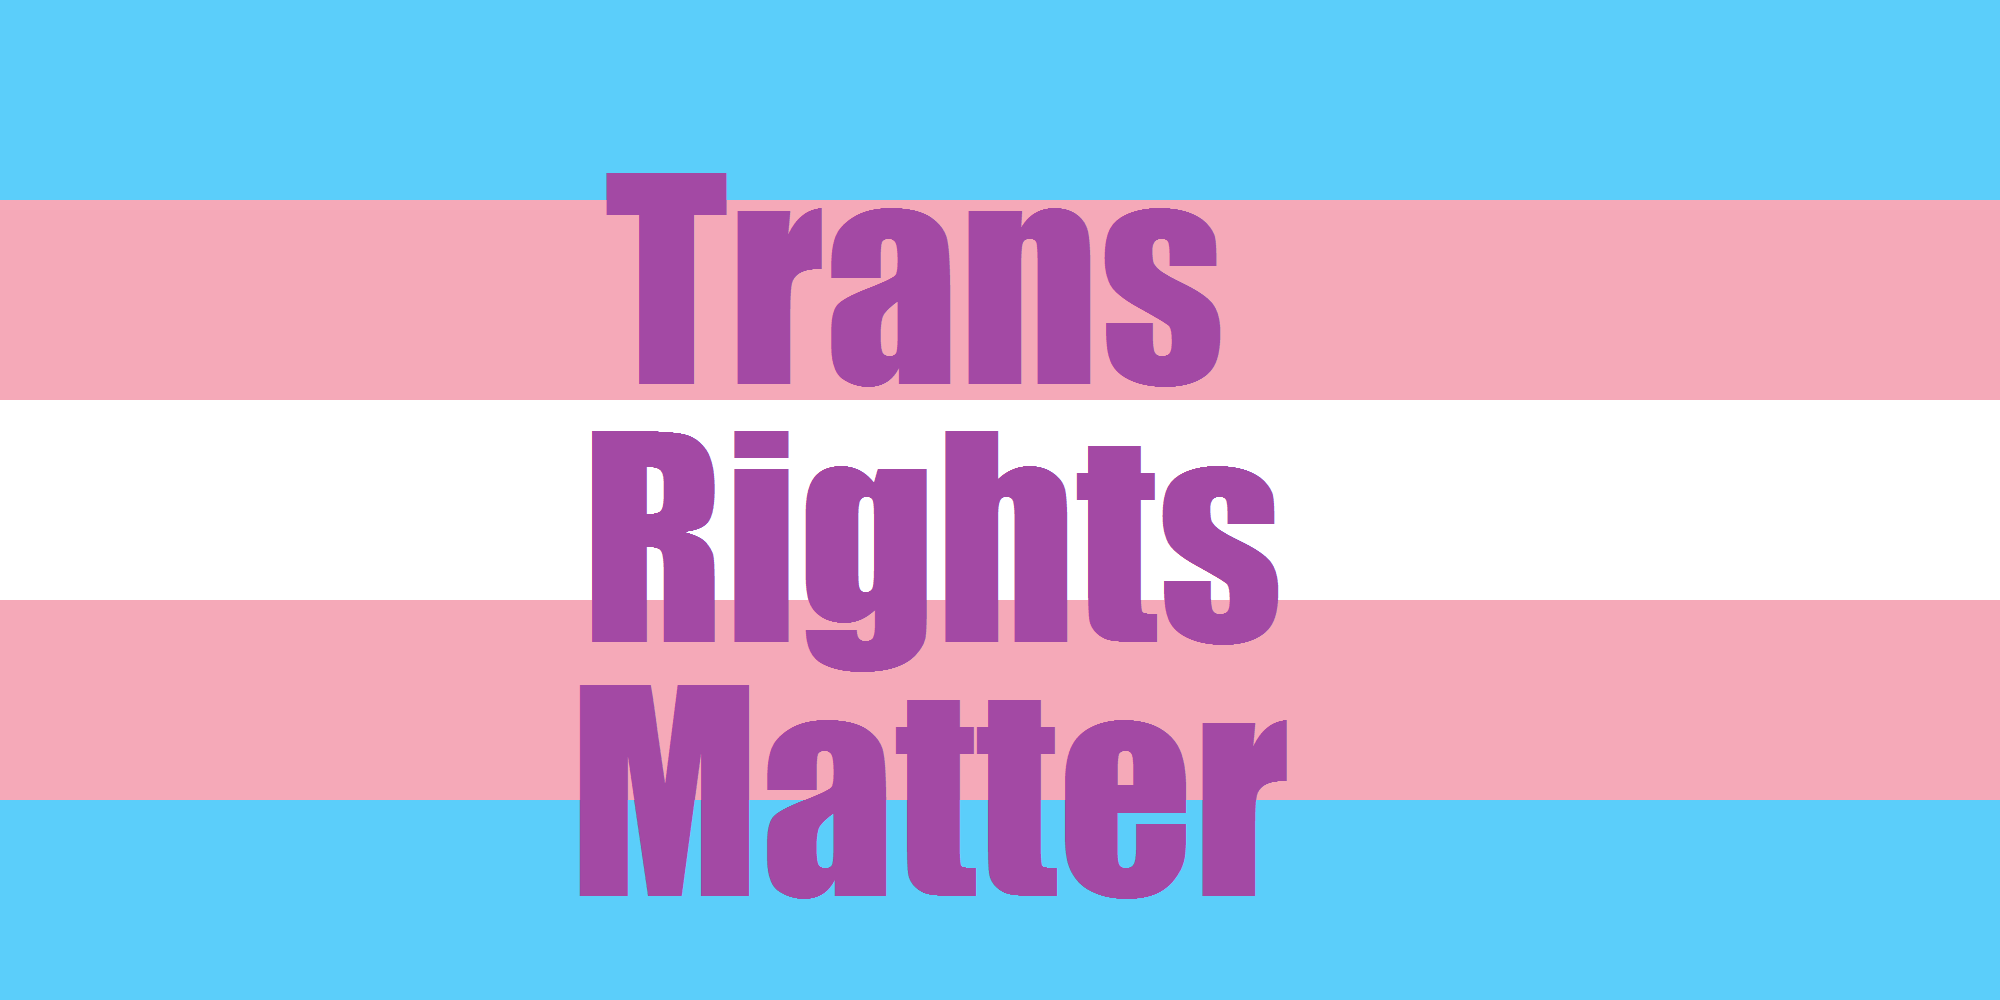 Image is trans flag with Trans Rights Matter in purple block letters.